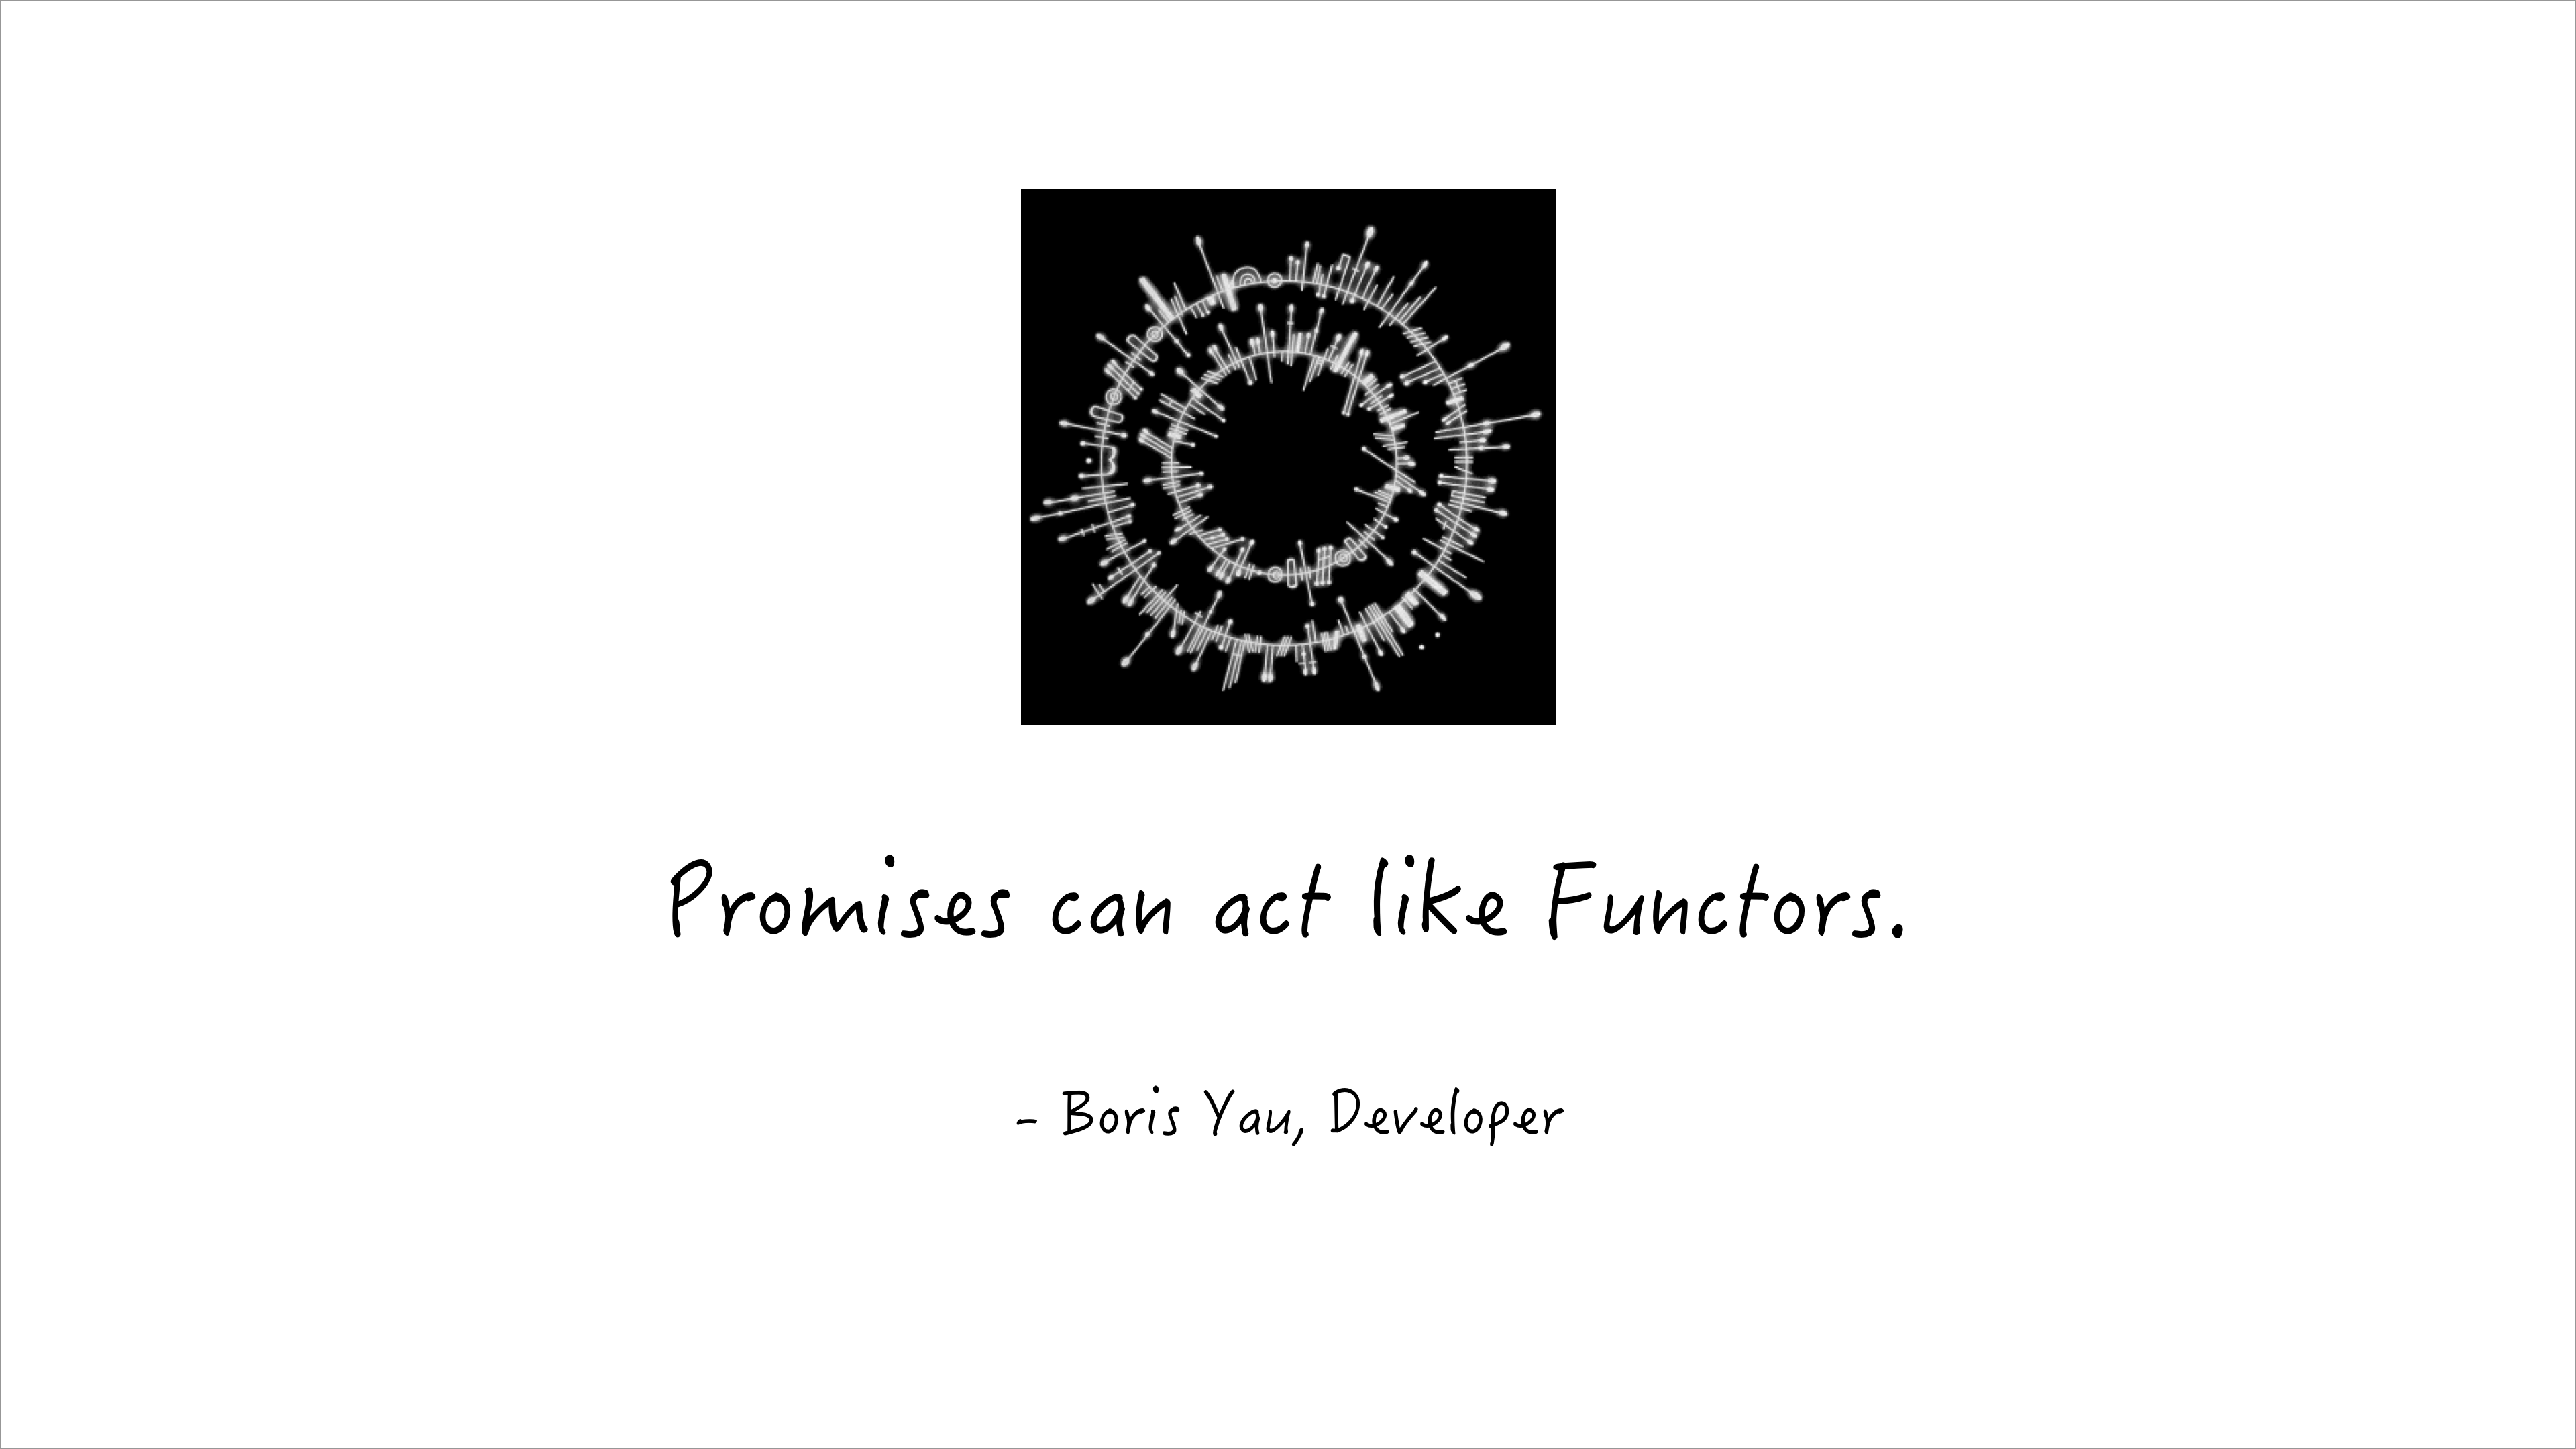 promise-can-act-like-functors